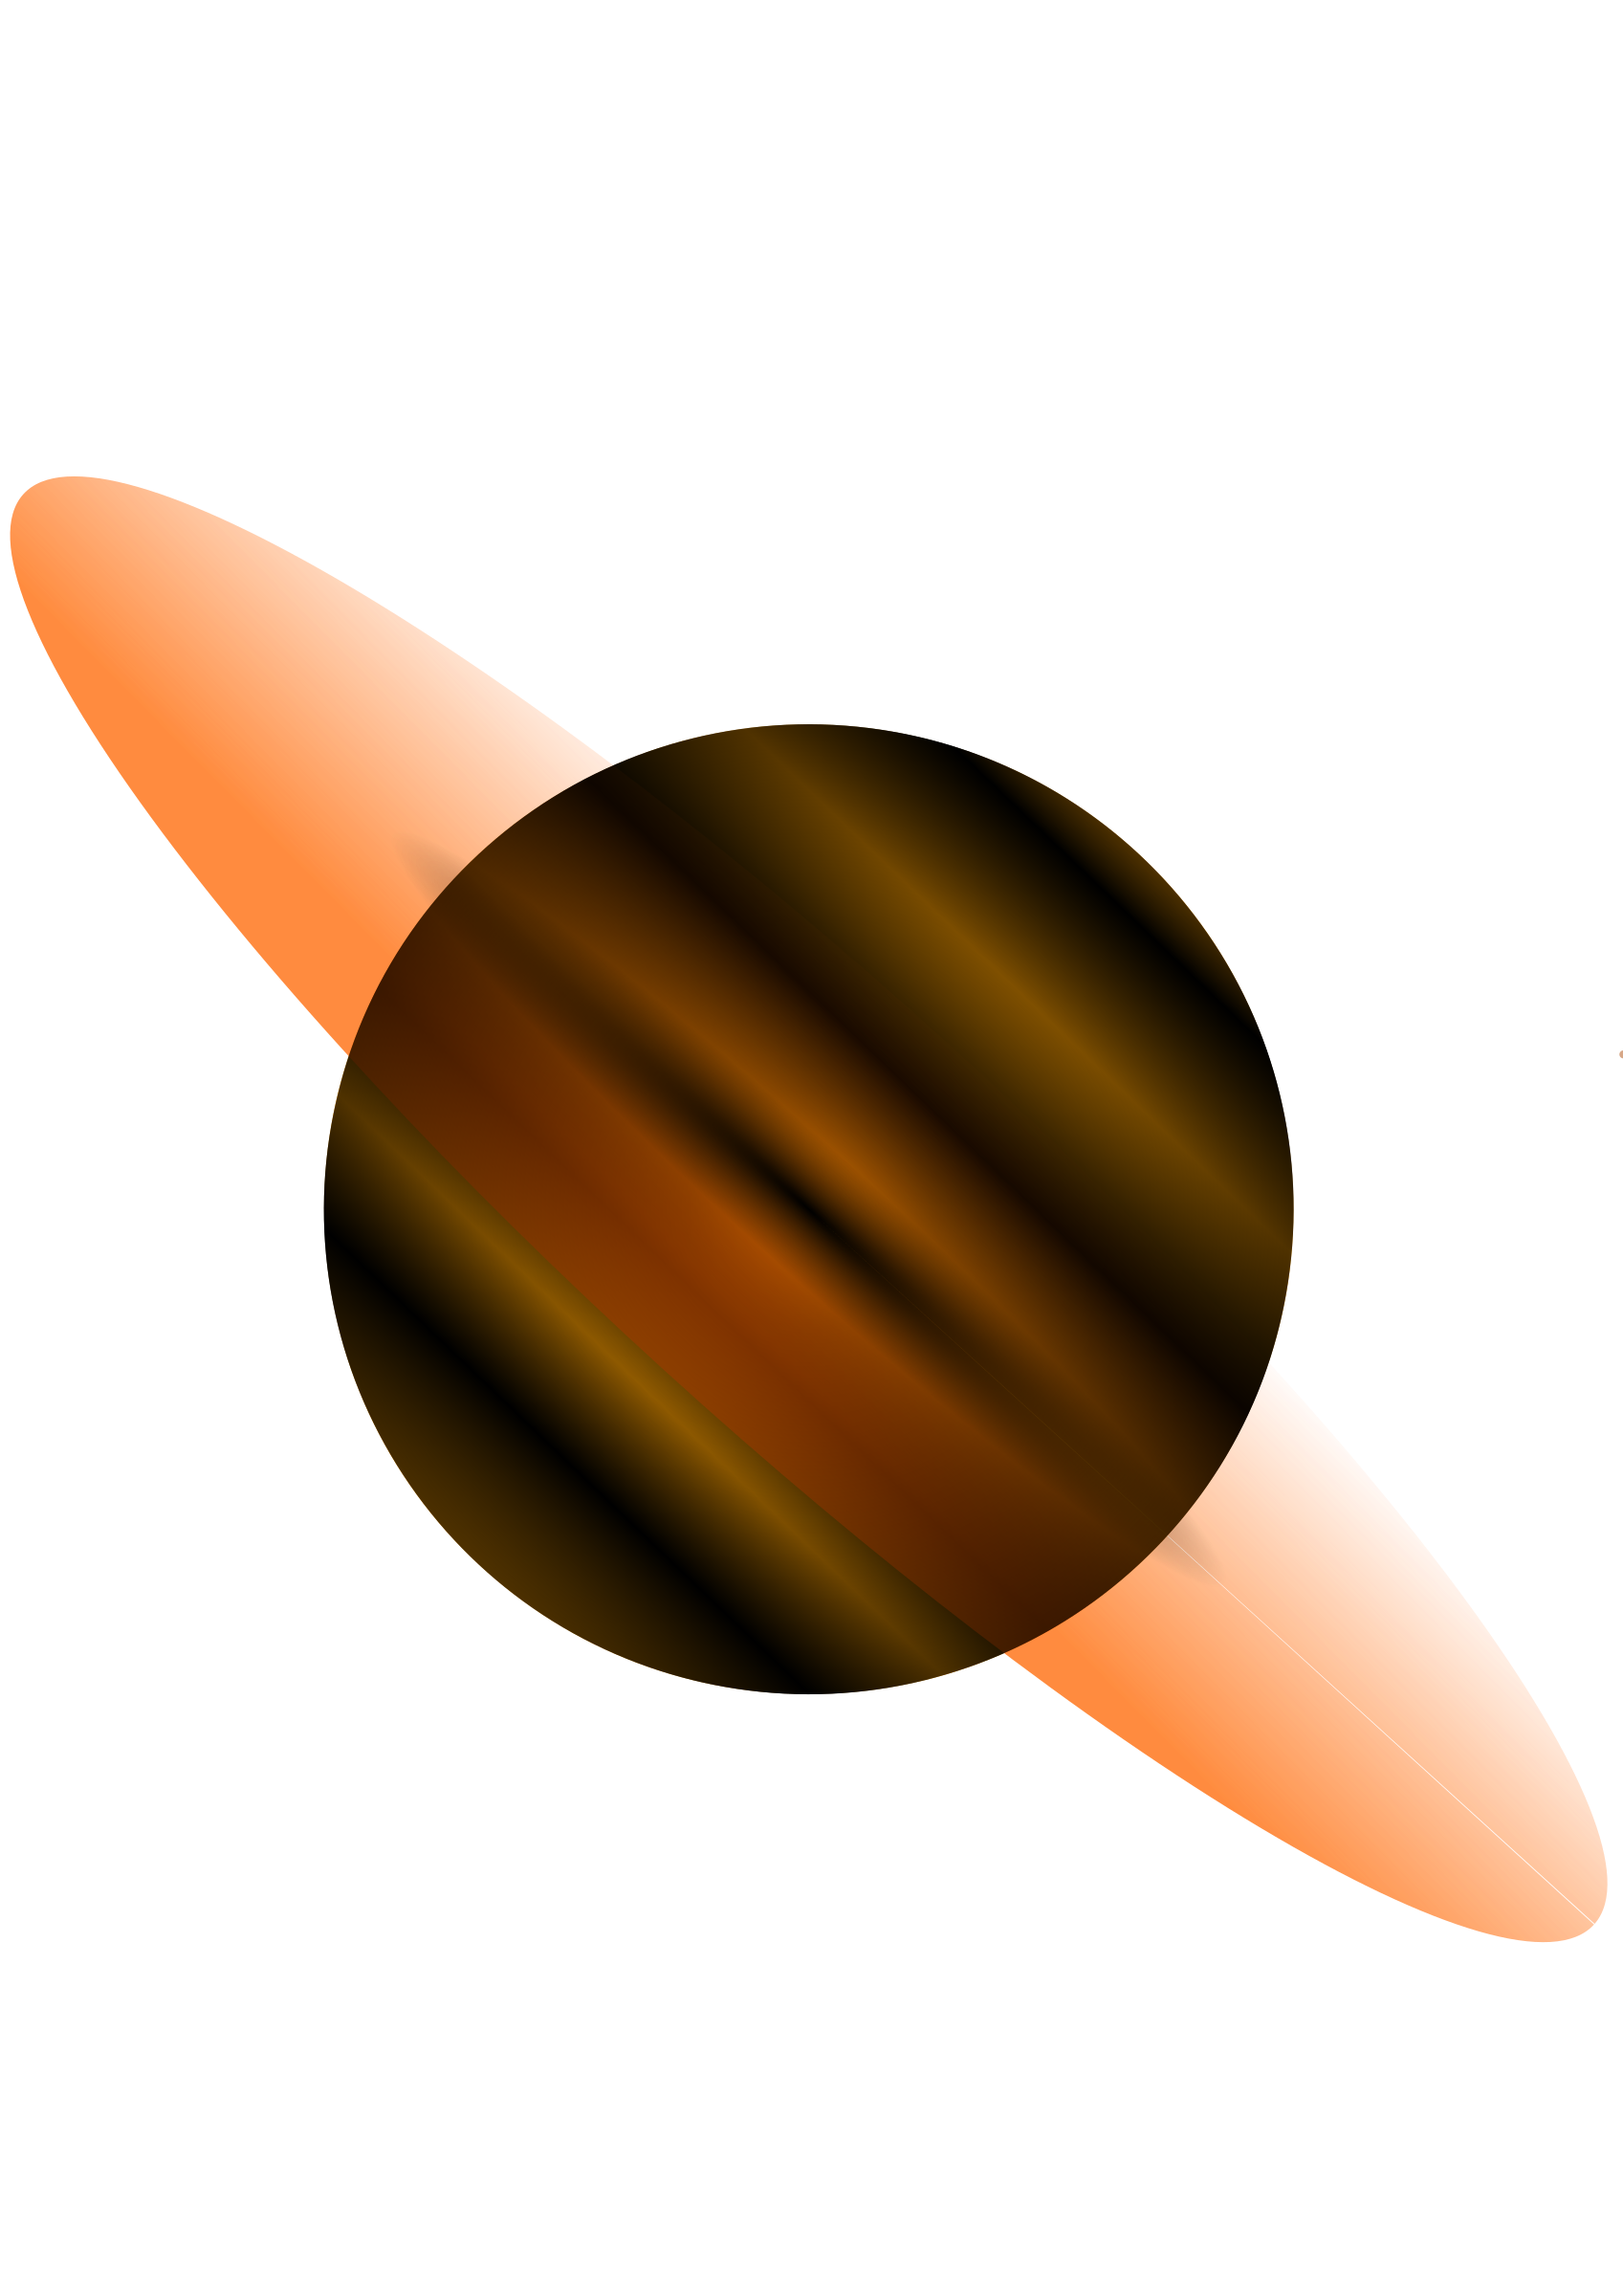 saturn clipart red planet